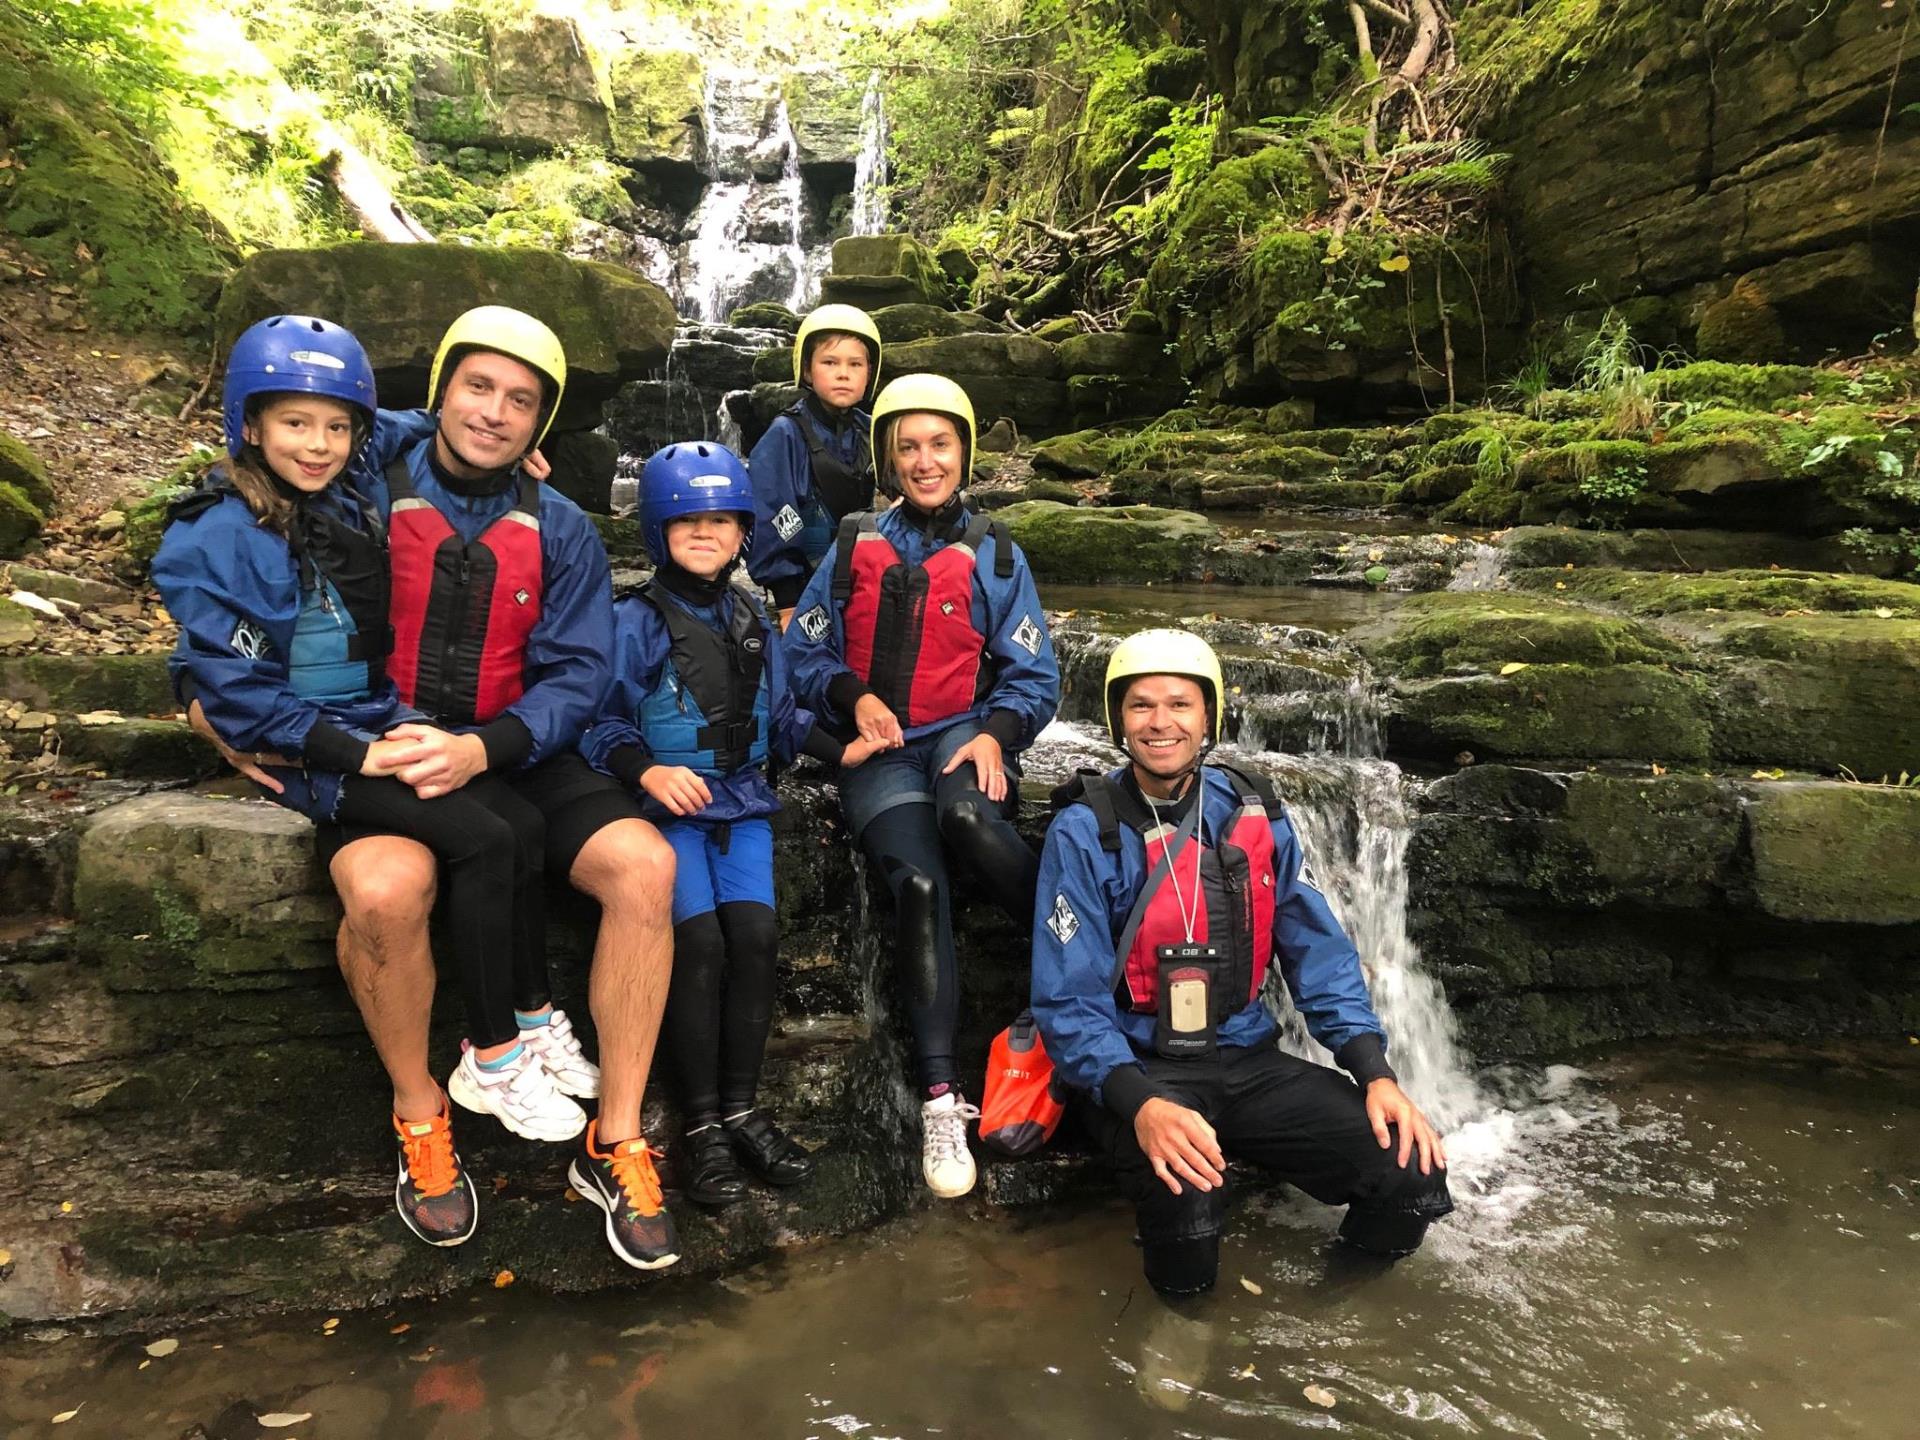 Gorge Walking in the Brecon Beacons